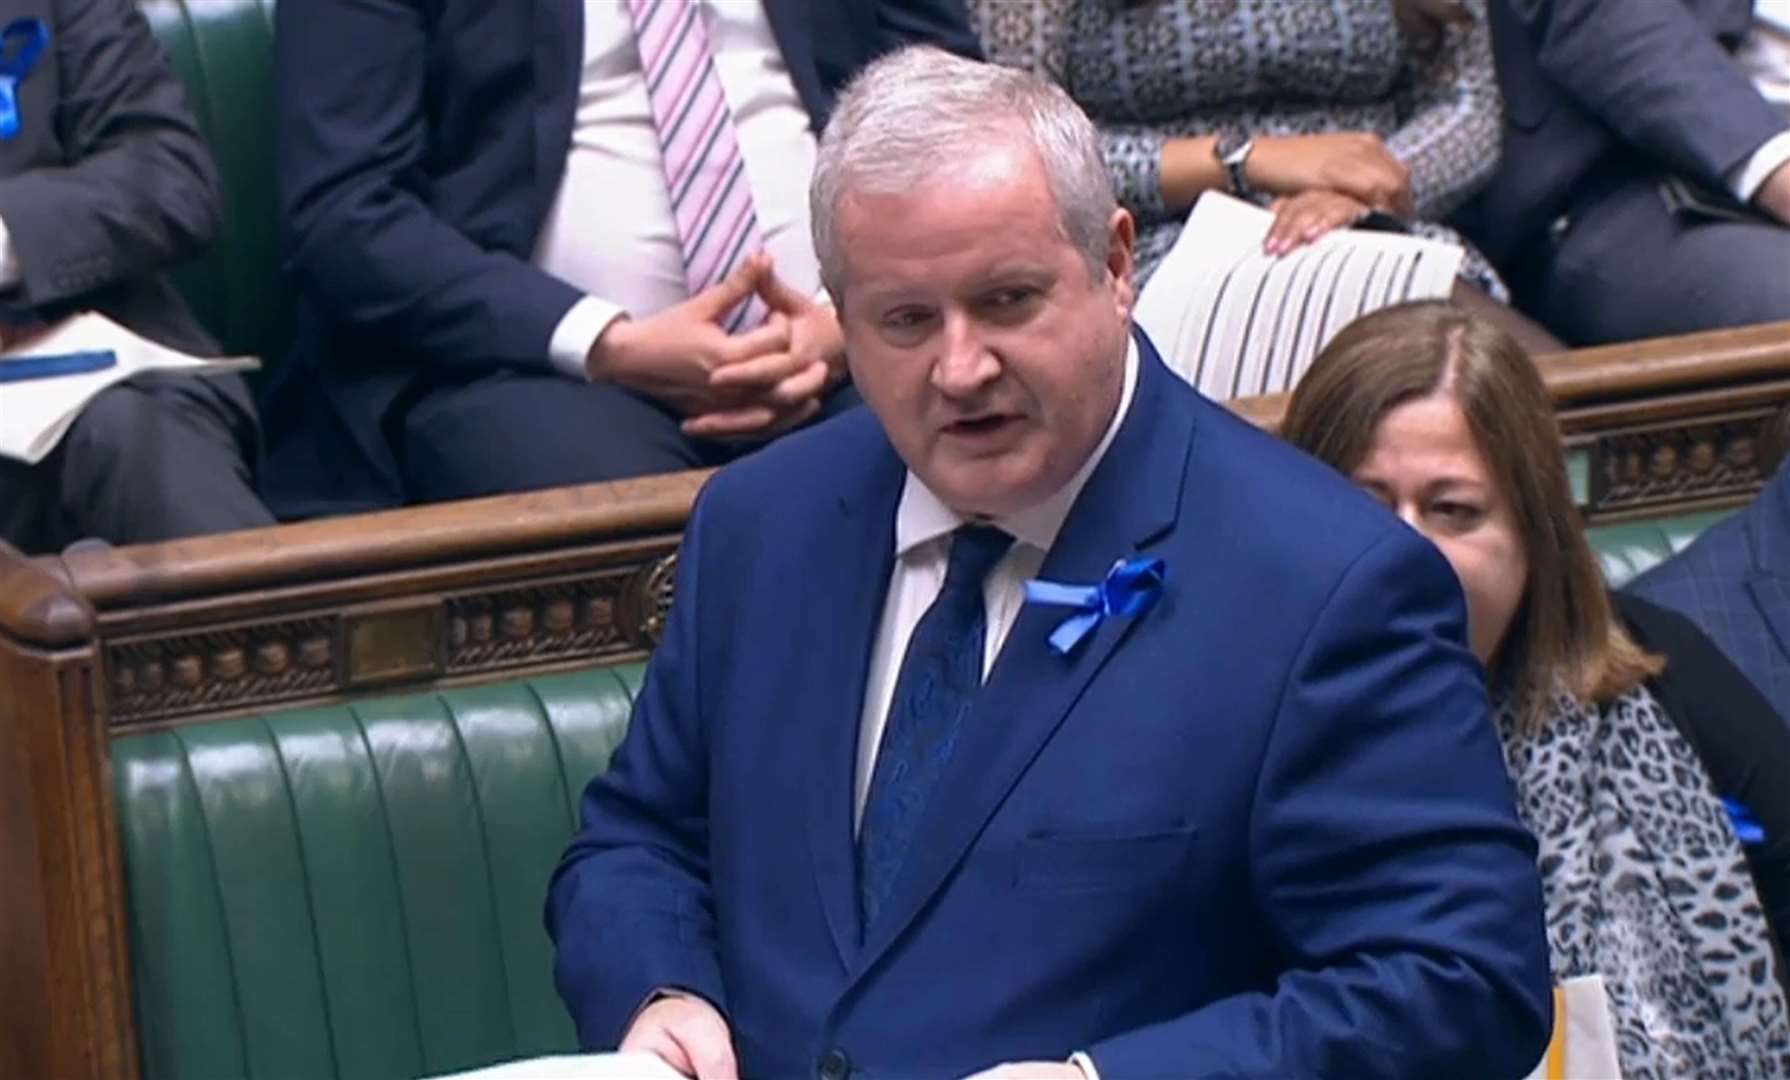 Ian Blackford was heard on the recording calling for other party MPs to support Mr Brady (PA)